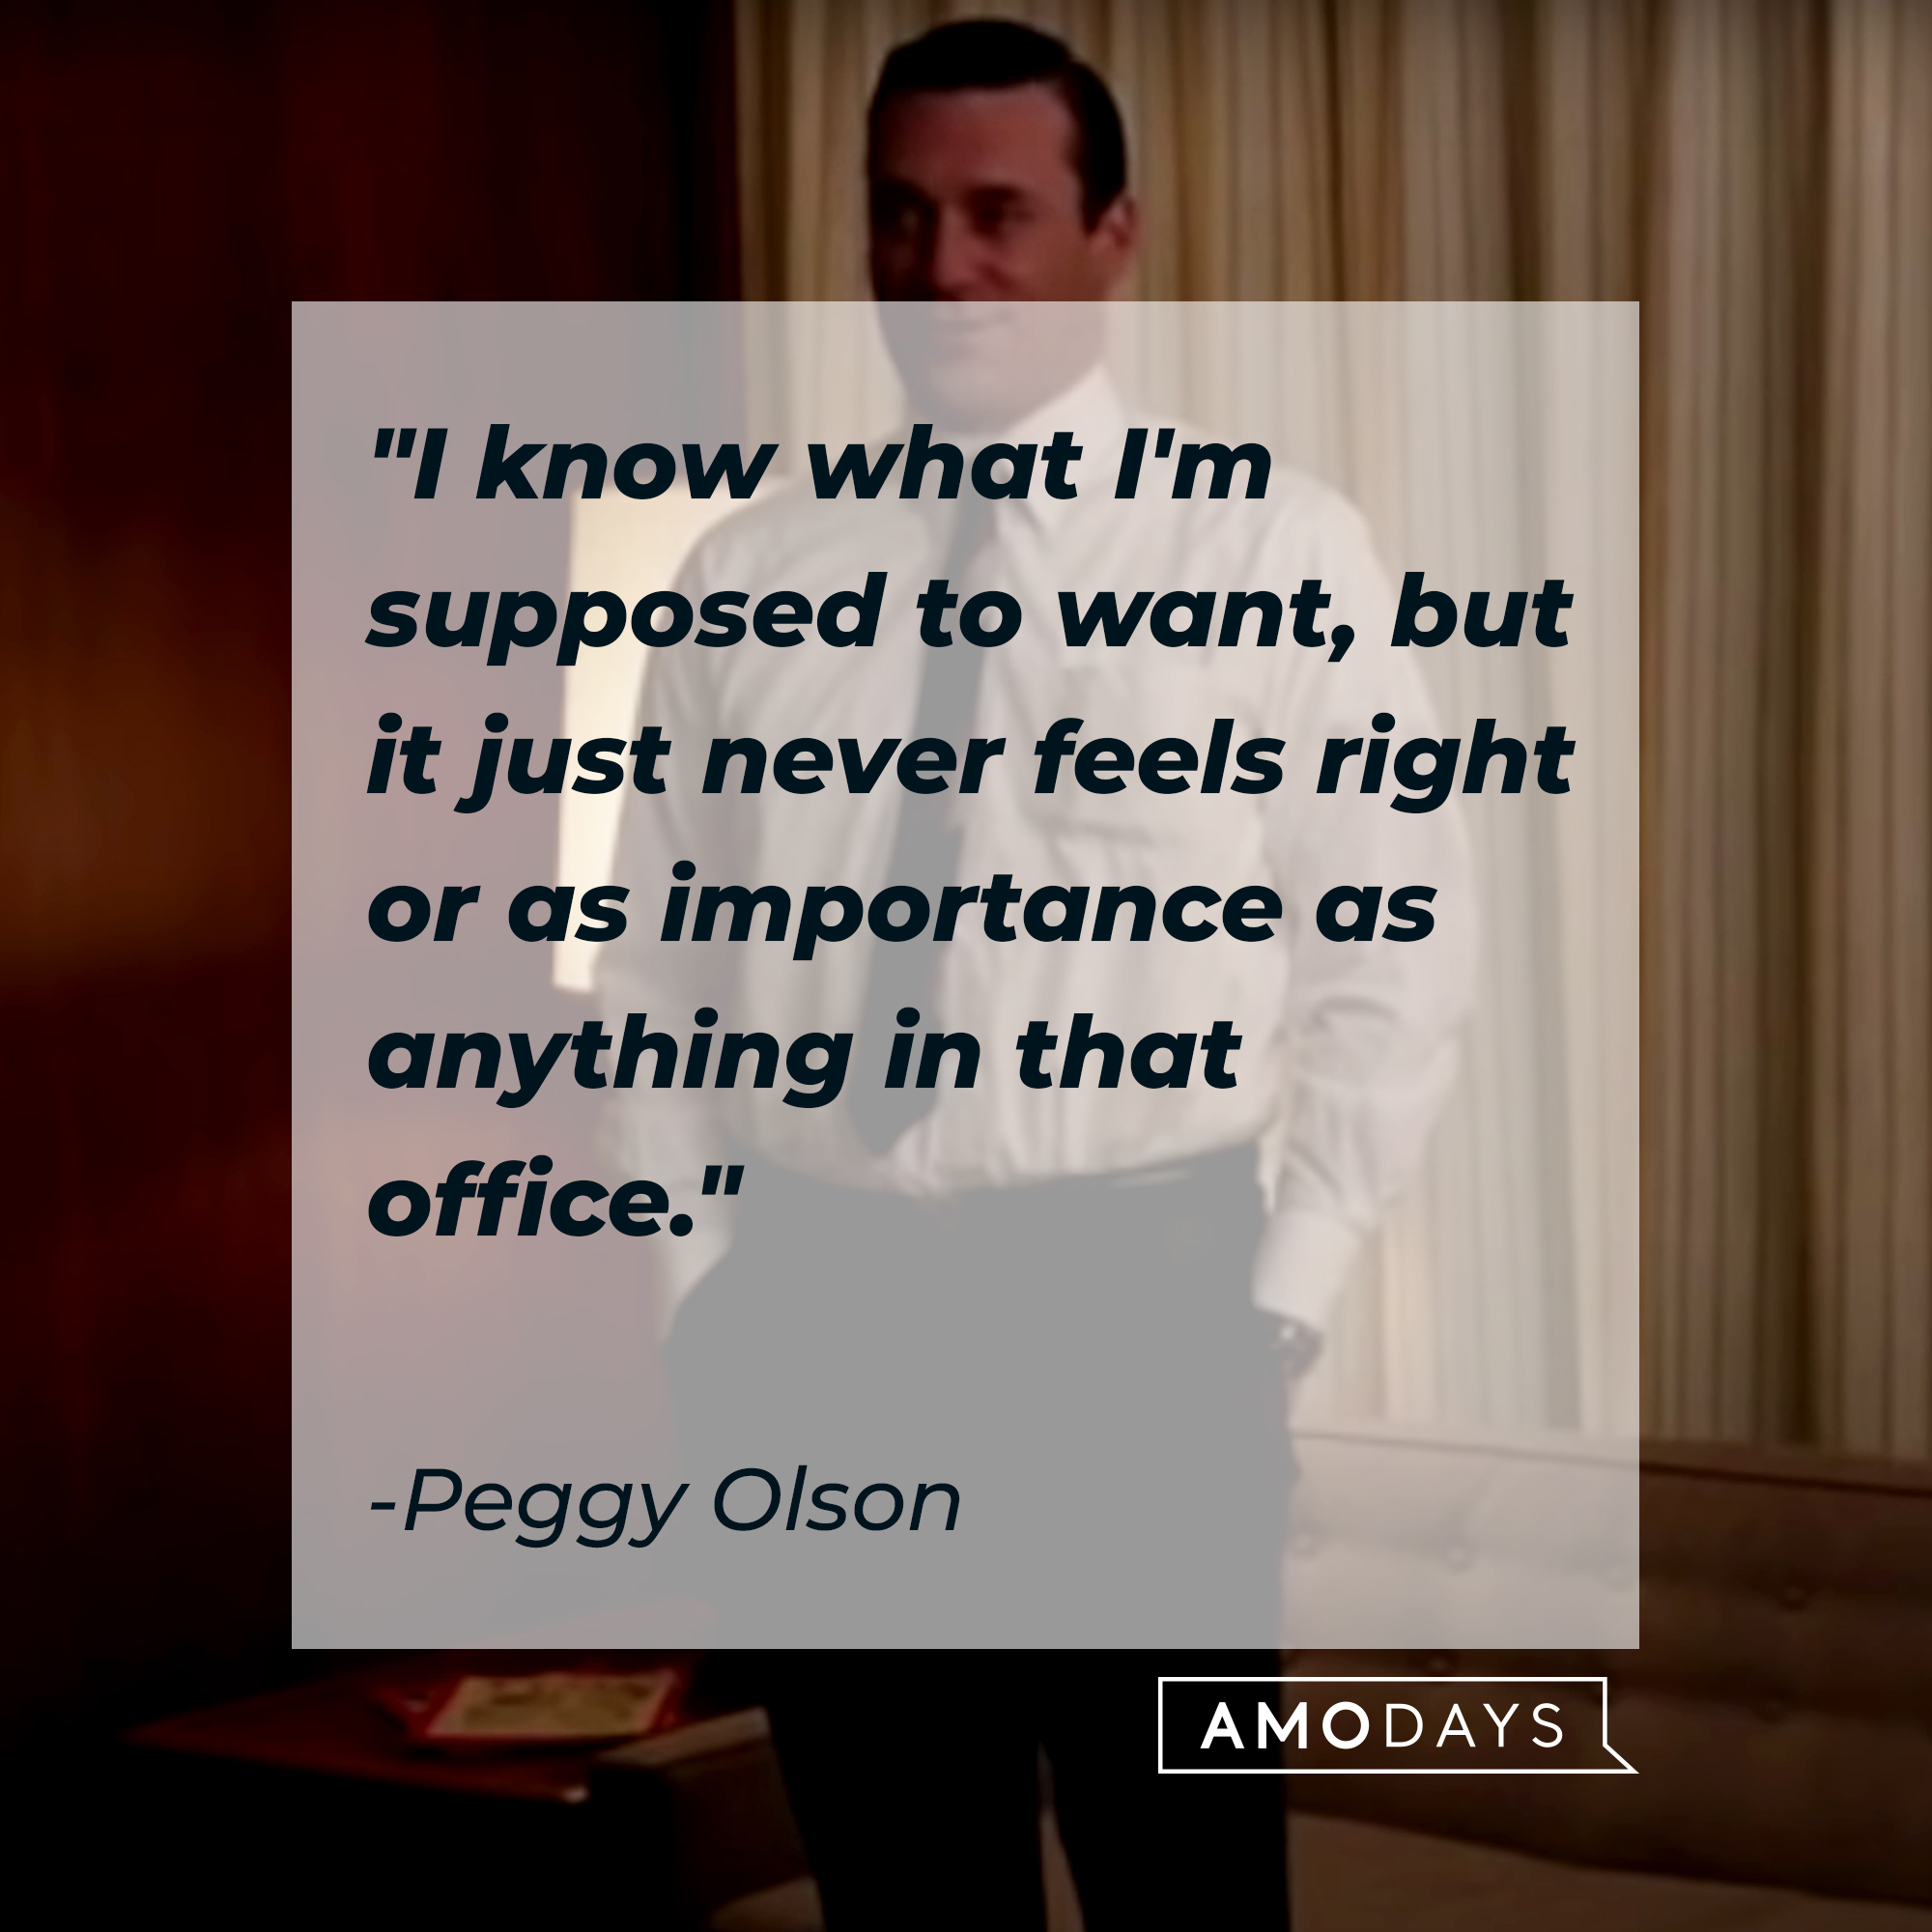 Peggy Olson's quote: "I know what I'm supposed to want, but it just never feels right or as importance as anything in that office." | Source: Facebook.com/MadMen